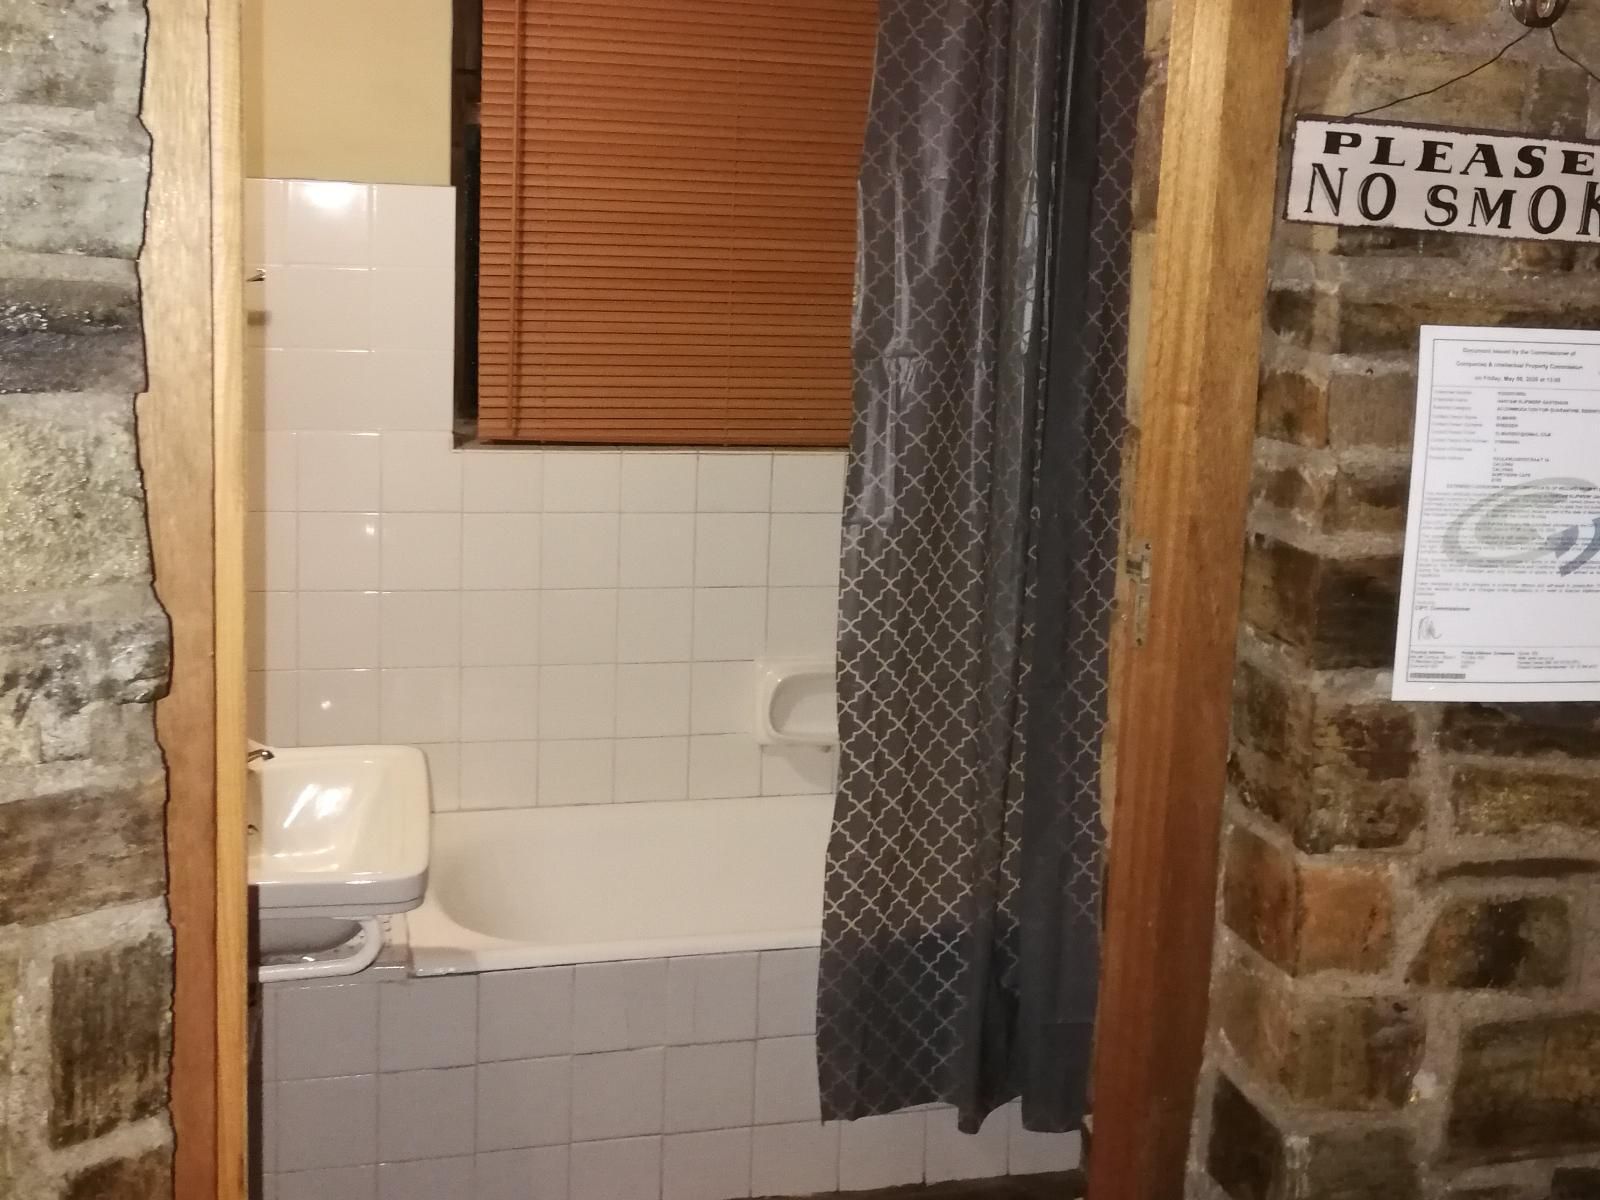 Klipwerf Self Catering And Camping Calvinia Northern Cape South Africa Bathroom